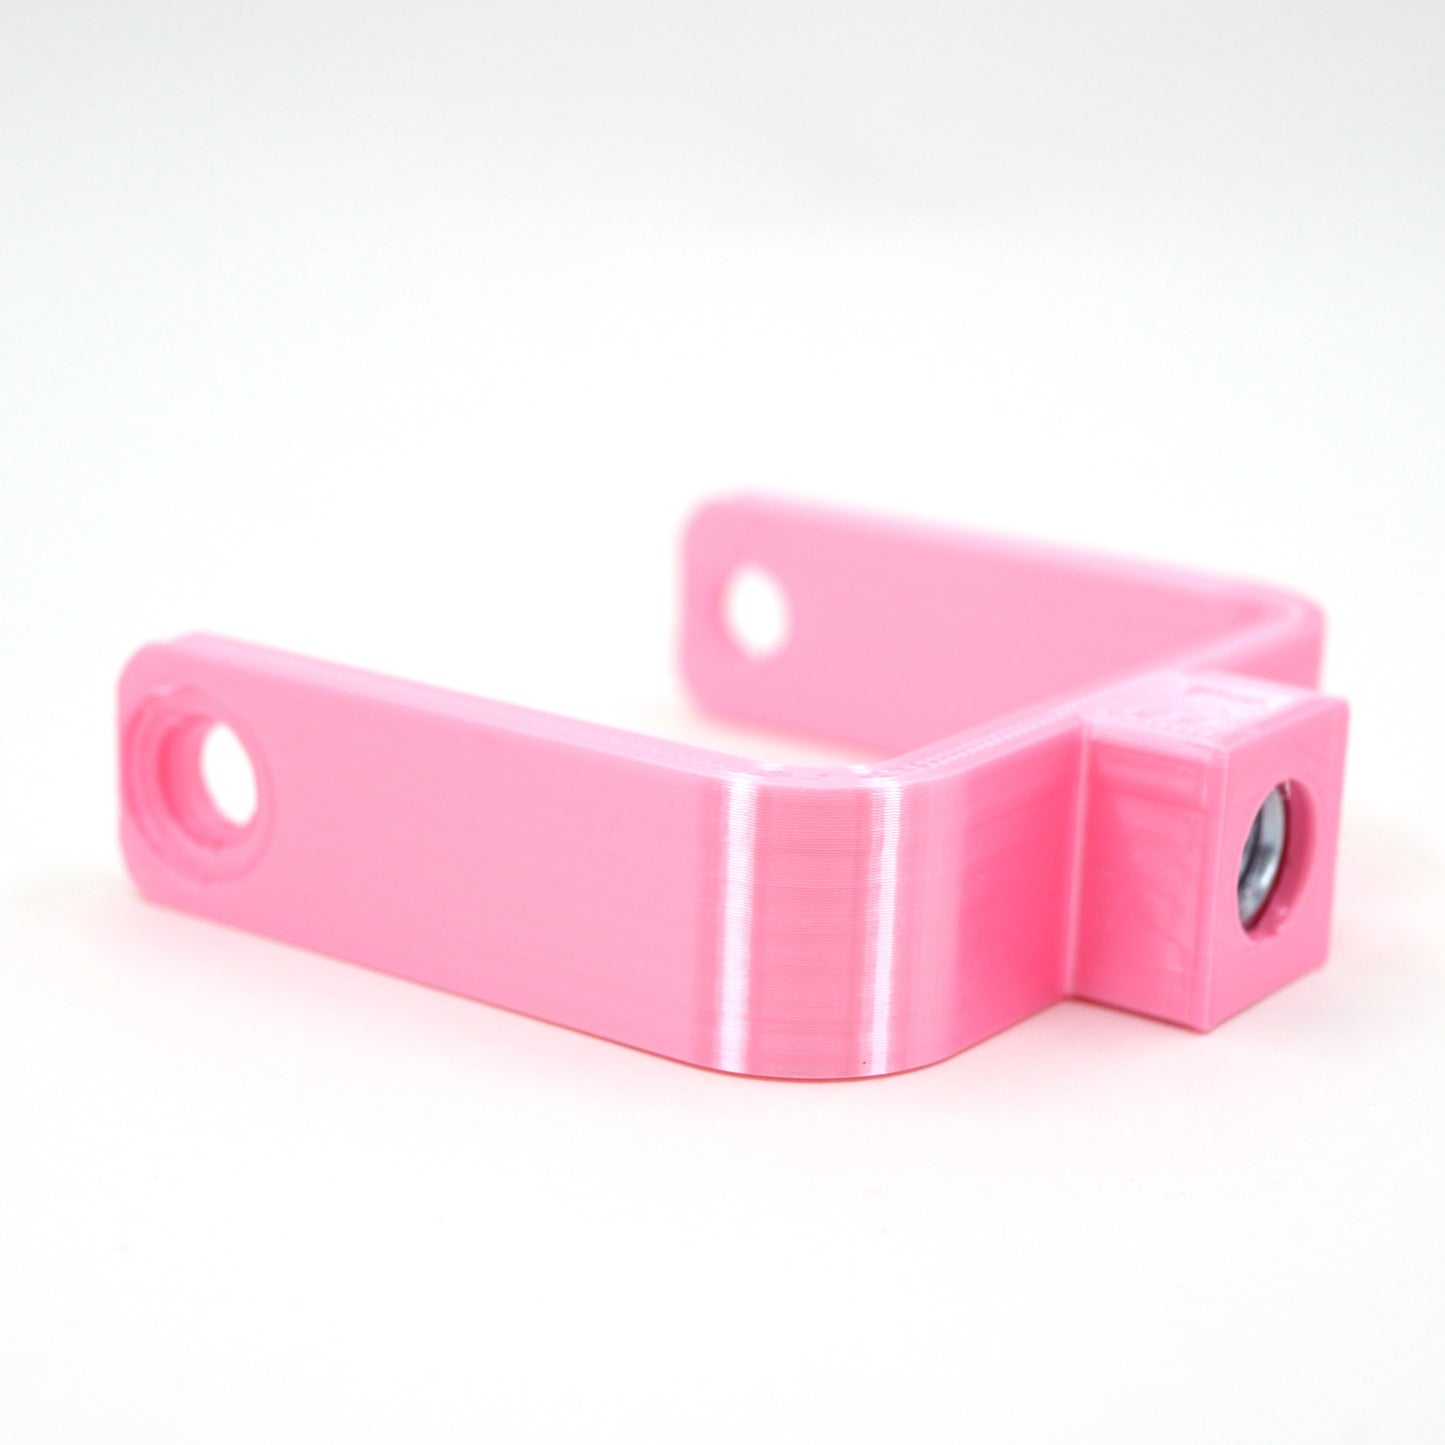 The left side of a pink microphone mount for the Elgato Wave microphone.